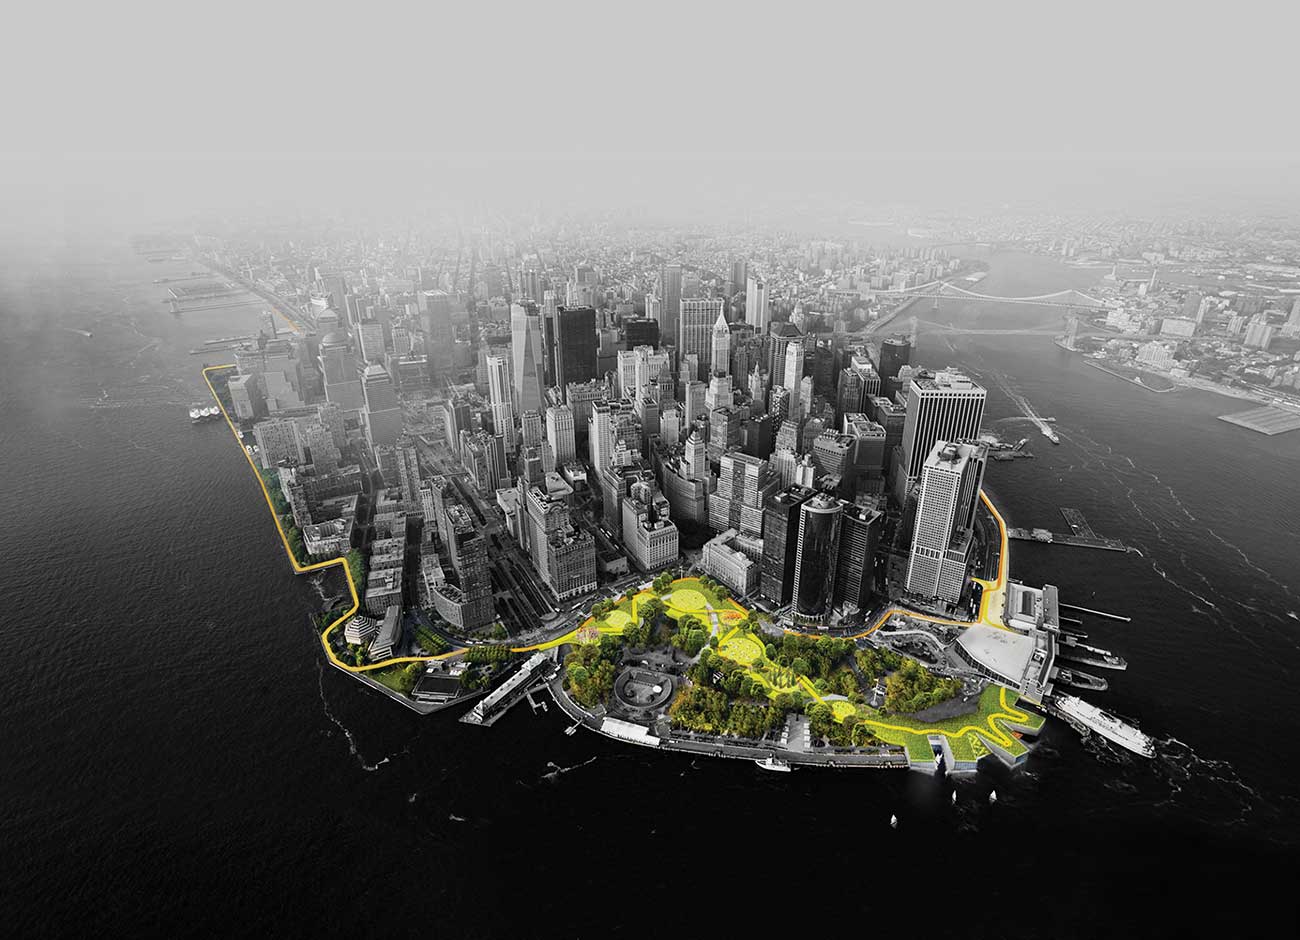 an aerial view of lower Manhattan with a band of greenbelt where proposed changes are to occur